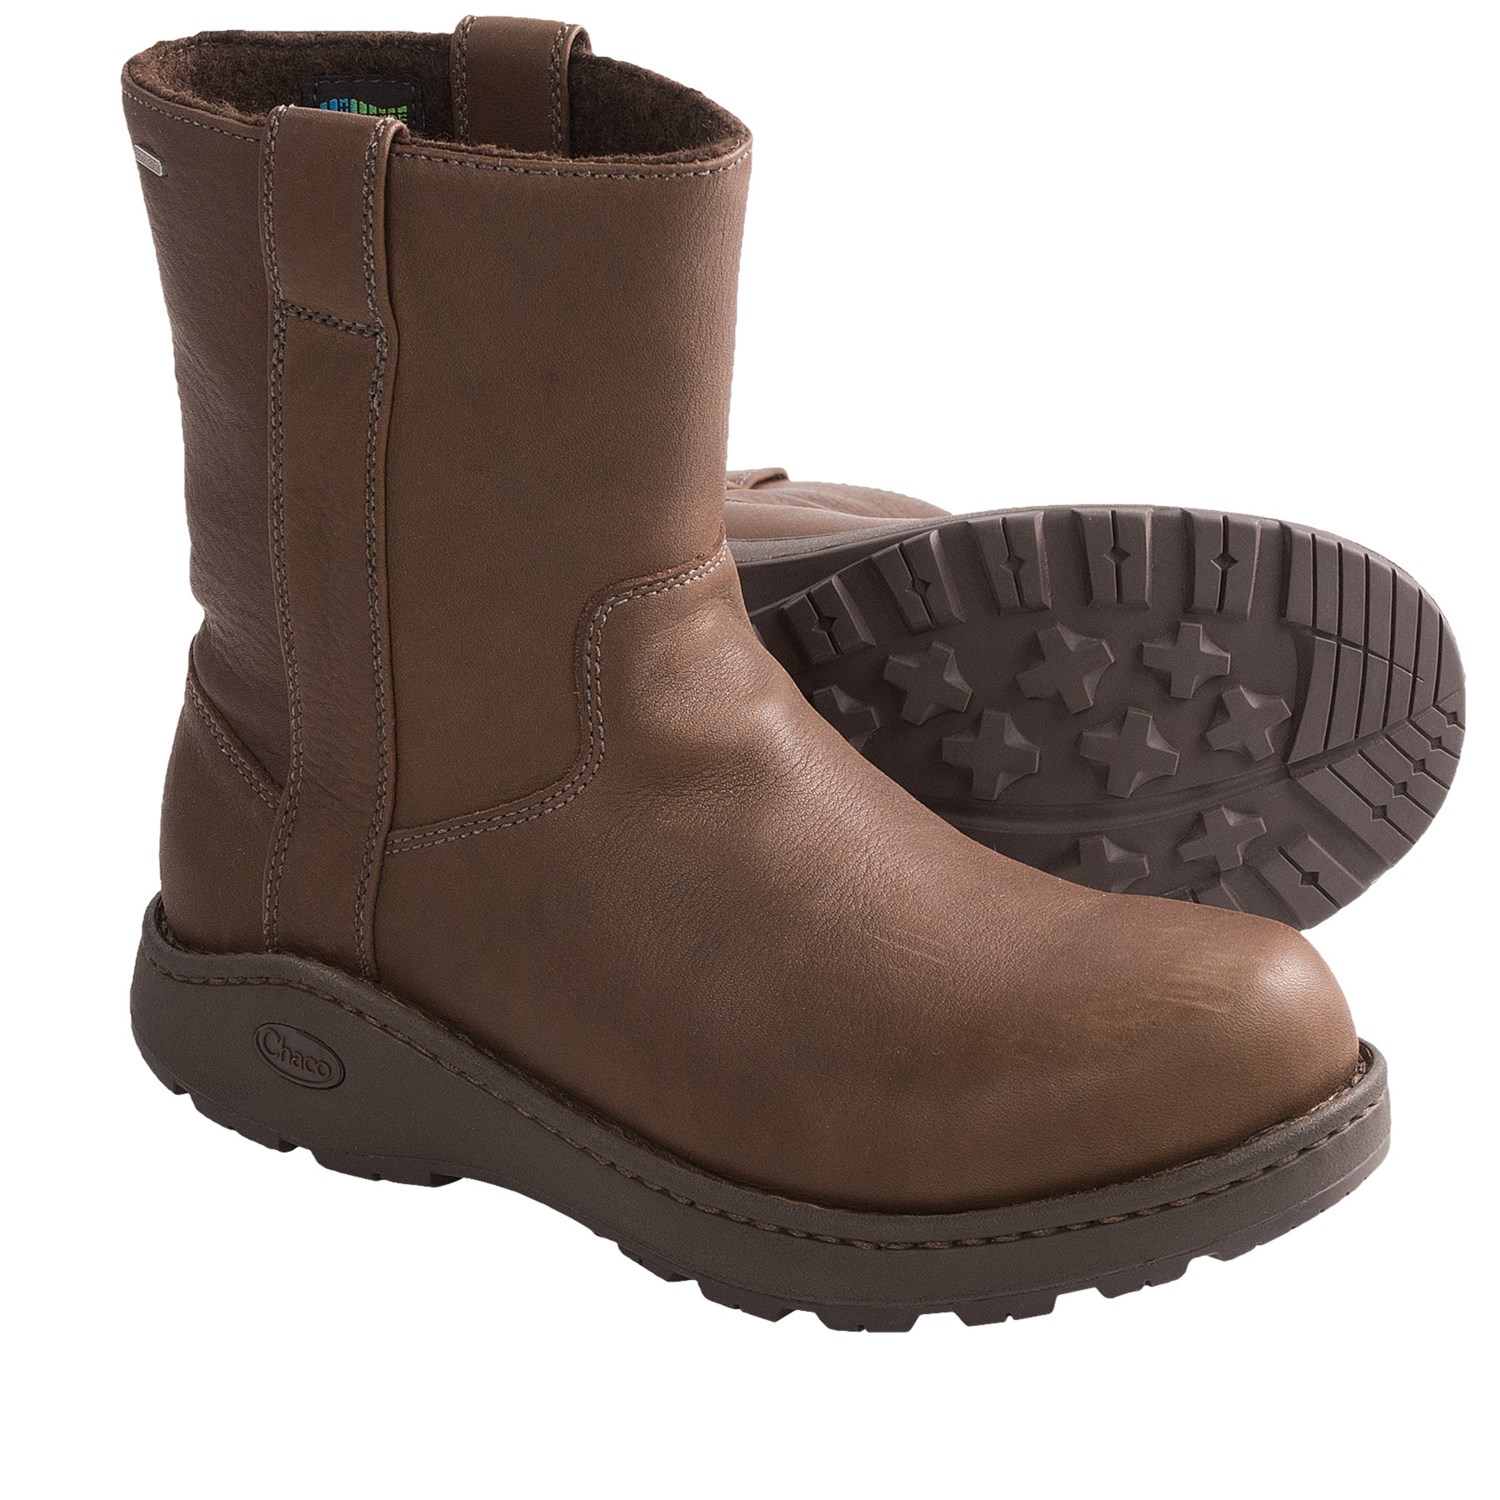 Snow Boots Slip On - Yu Boots